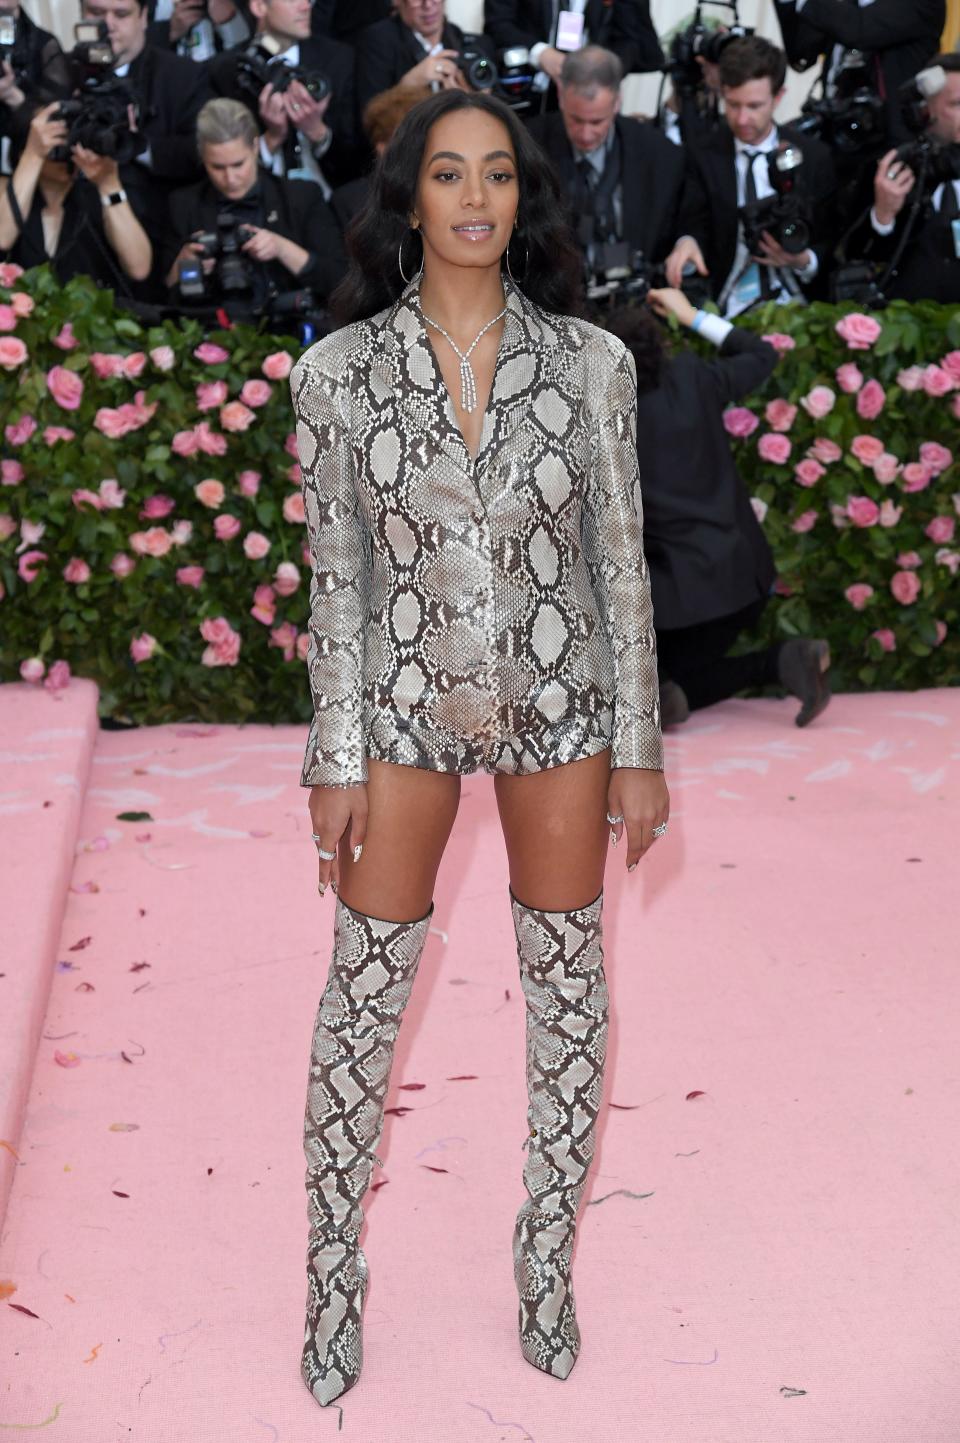 Solange at the Met Gala in 2019.